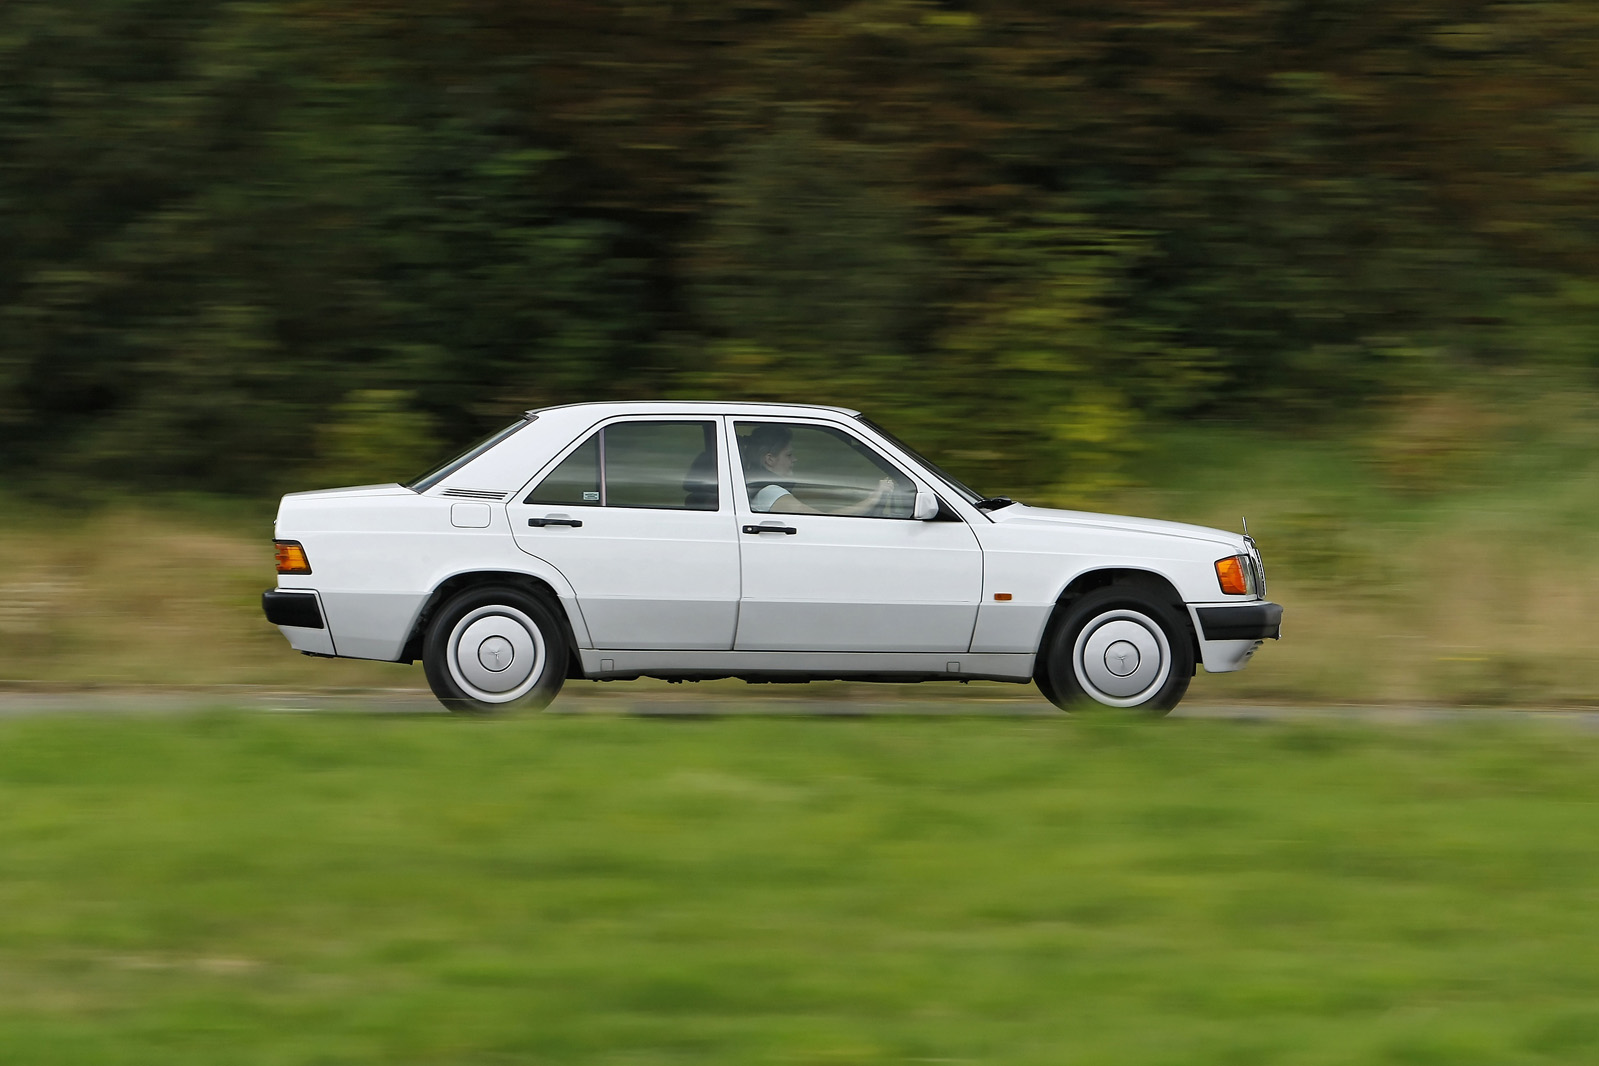 Used car buying guide: Mercedes-Benz 190